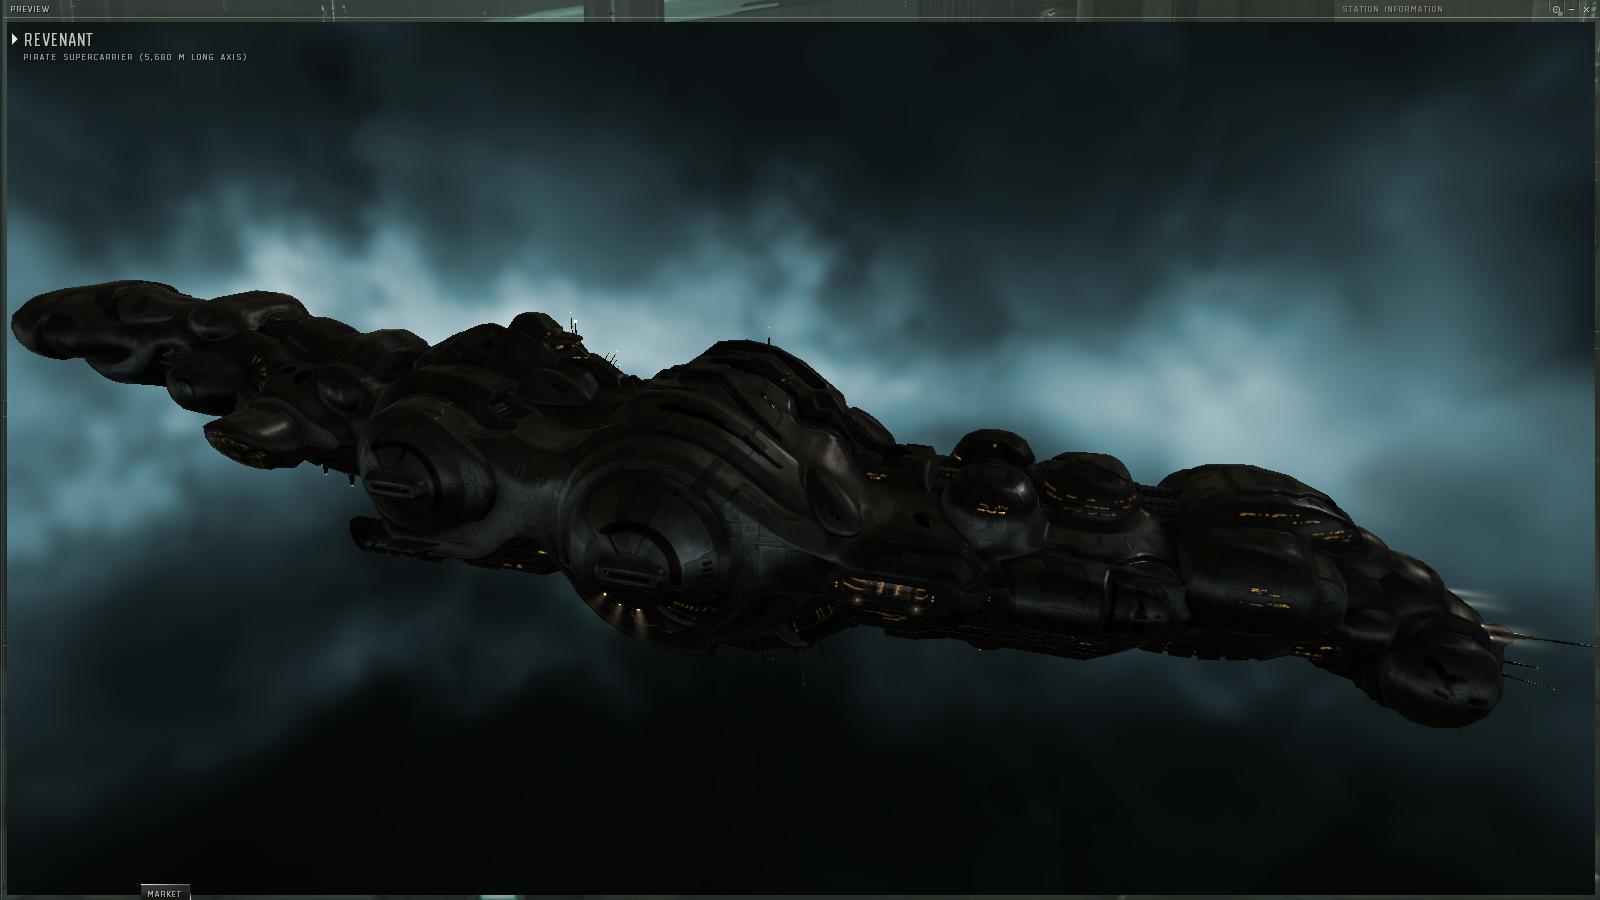 Expensive and Useless Micro-transactions - Revenant Supercarrier, $9,000 (Eve Online)